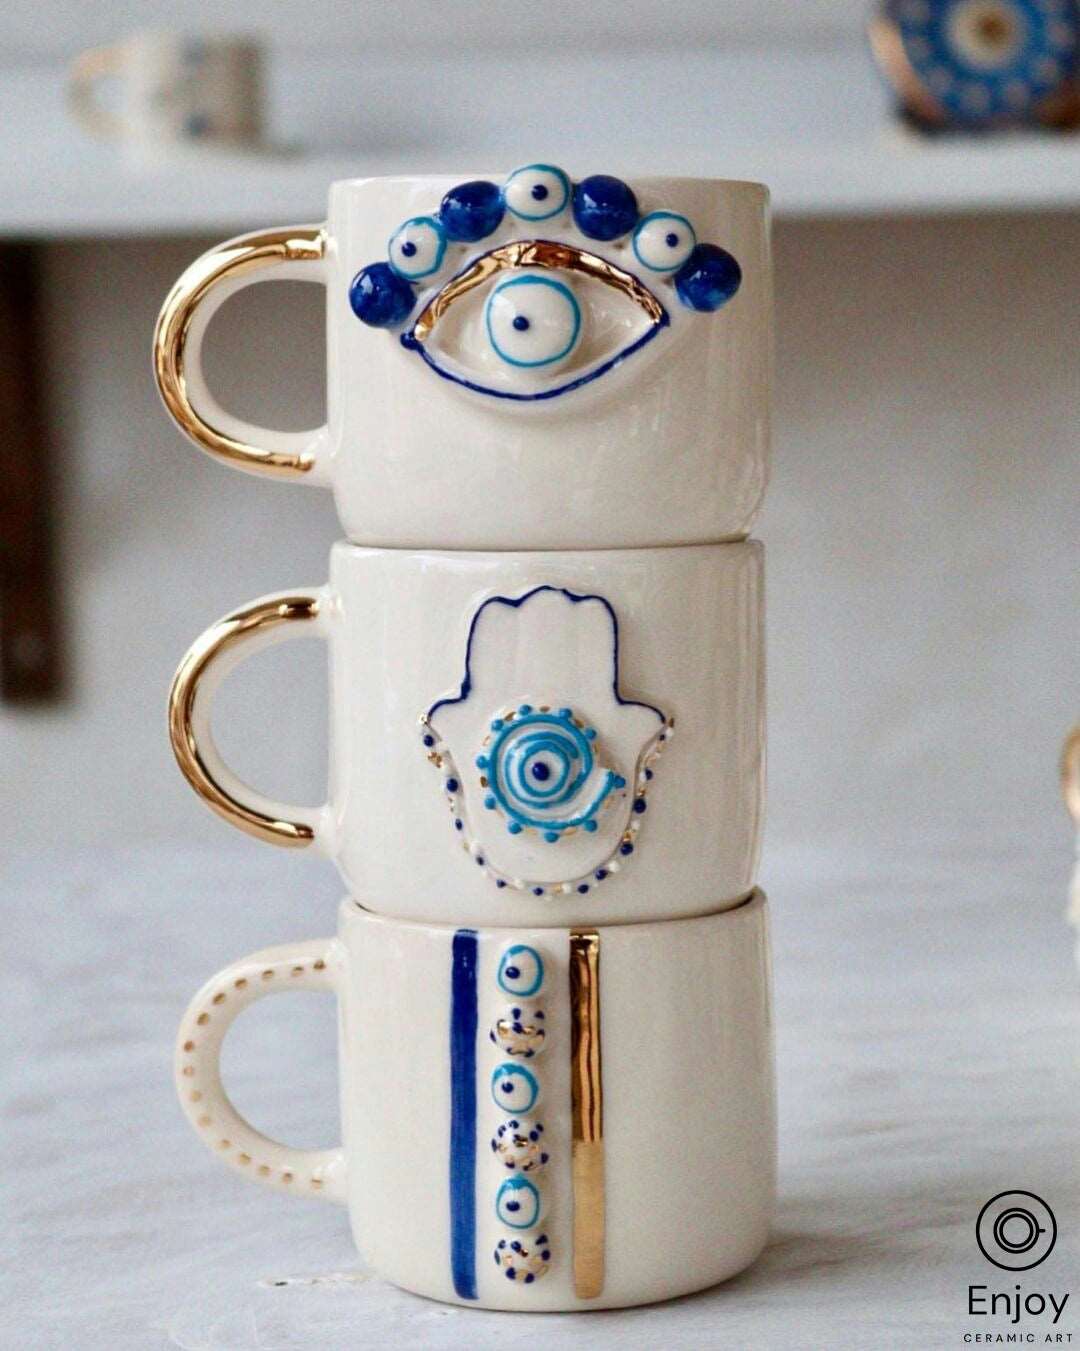 A stack of three white ceramic mugs with golden handles, each featuring a different blue evil eye design; the top with an eye, the middle with a hamsa hand, and the bottom with a stripe of multiple evil eyes, against a soft white background with light blue accents.